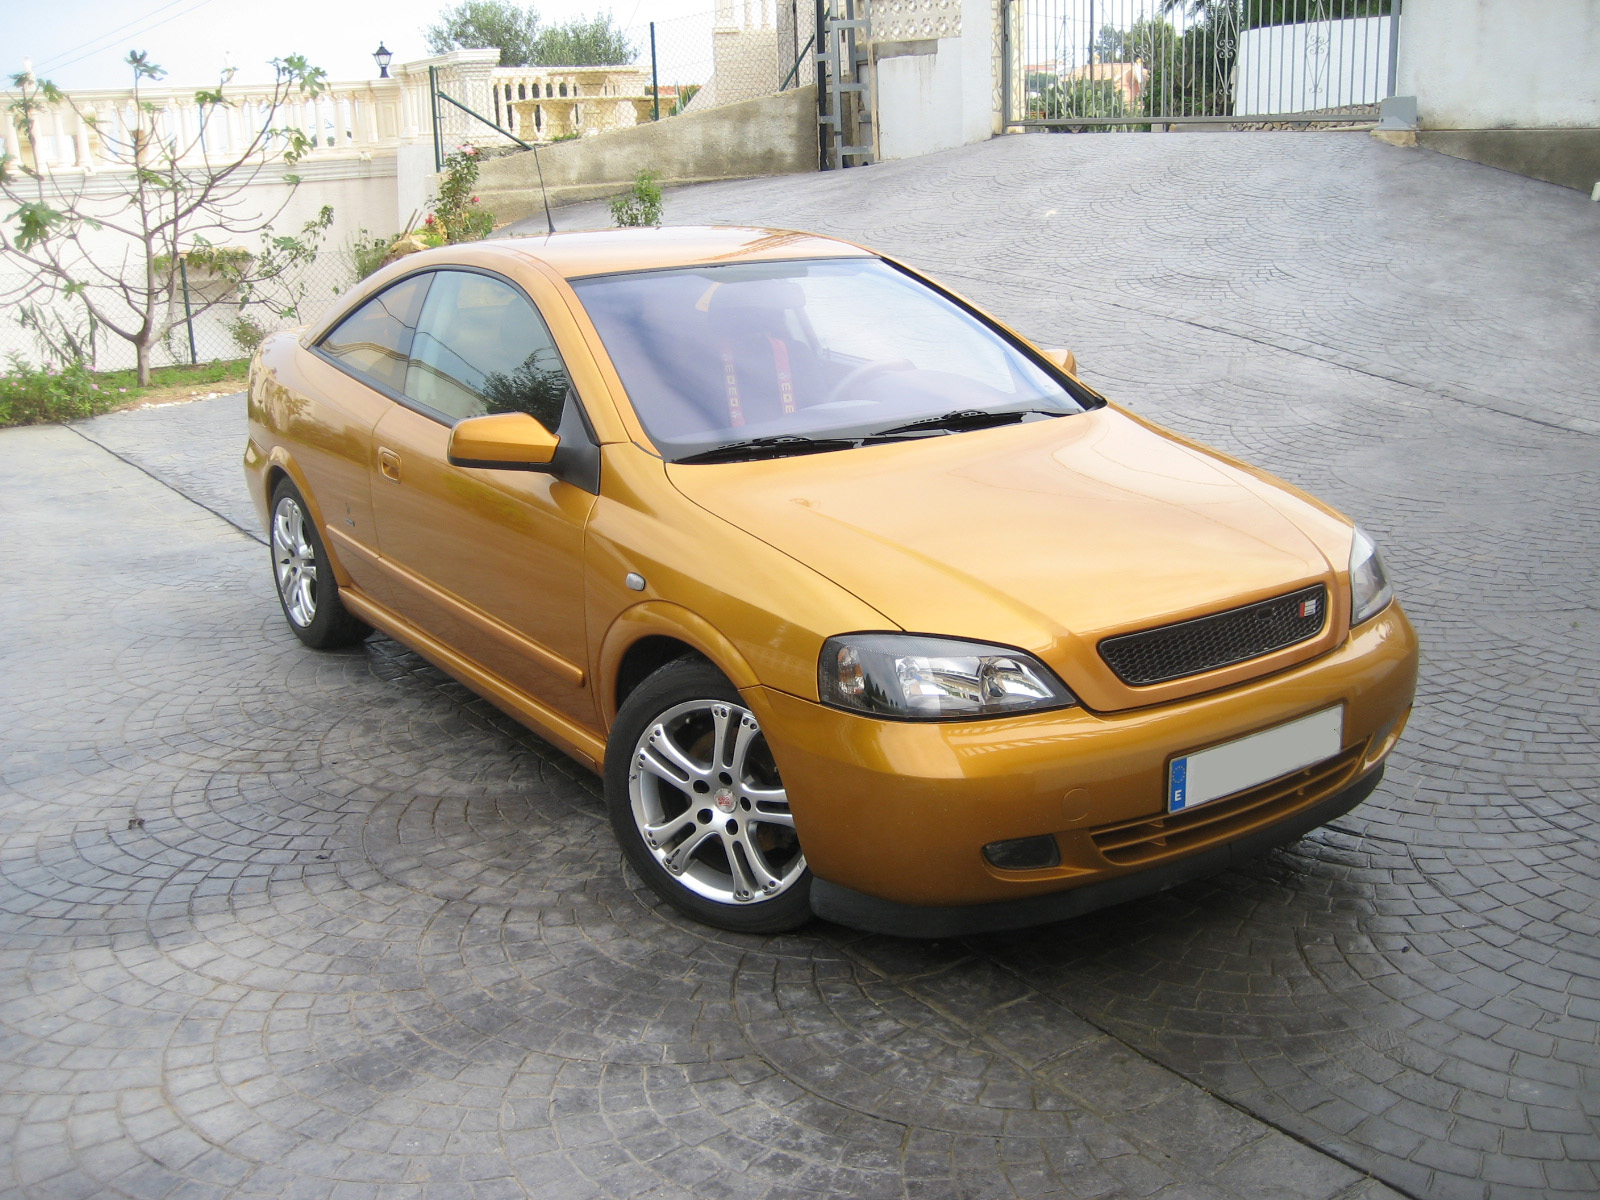 Opel Astra CoupÃ© | Flickr - Photo Sharing!